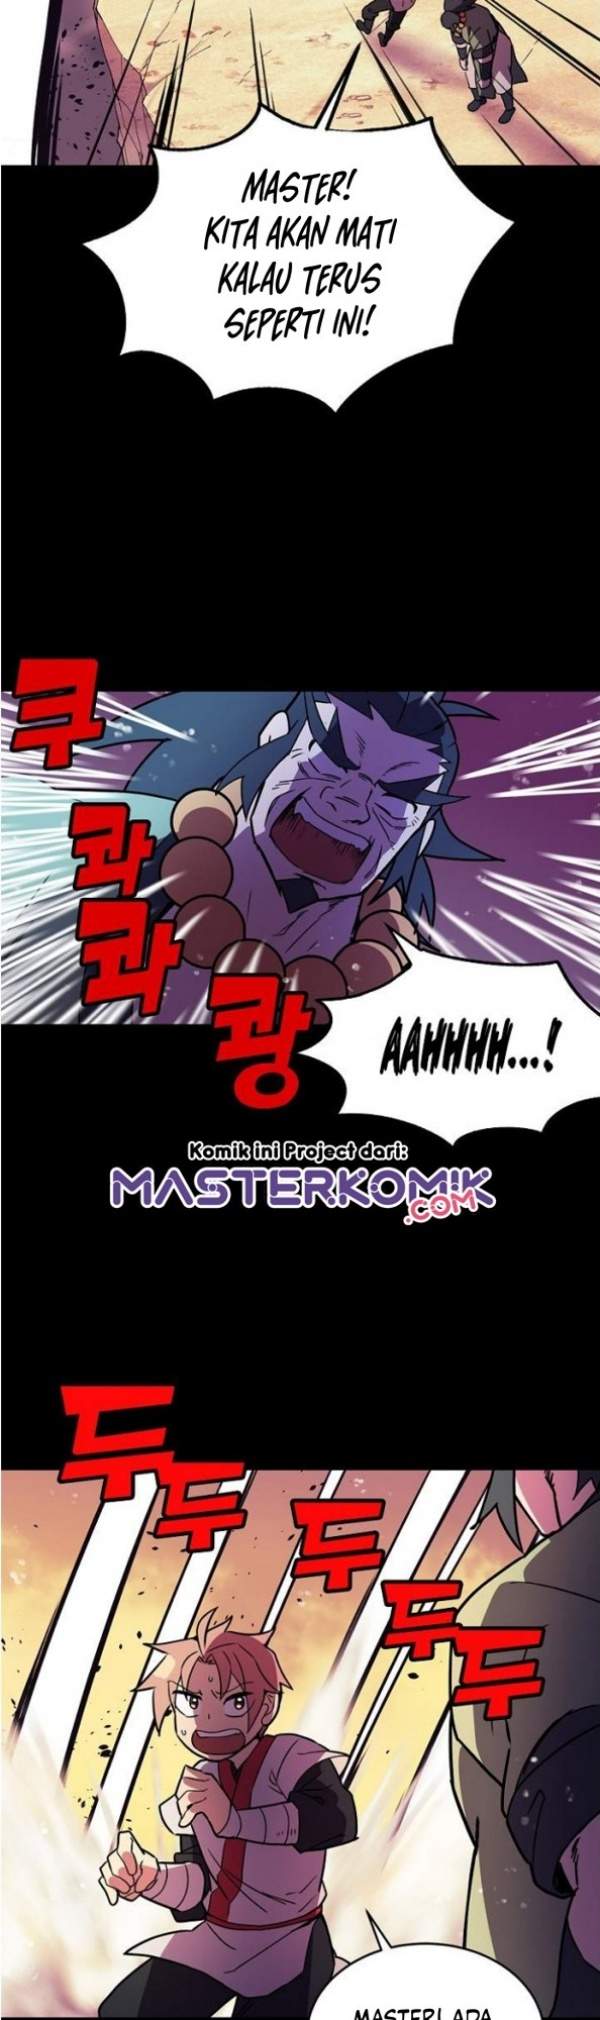 Absolute Martial Arts Chapter 13